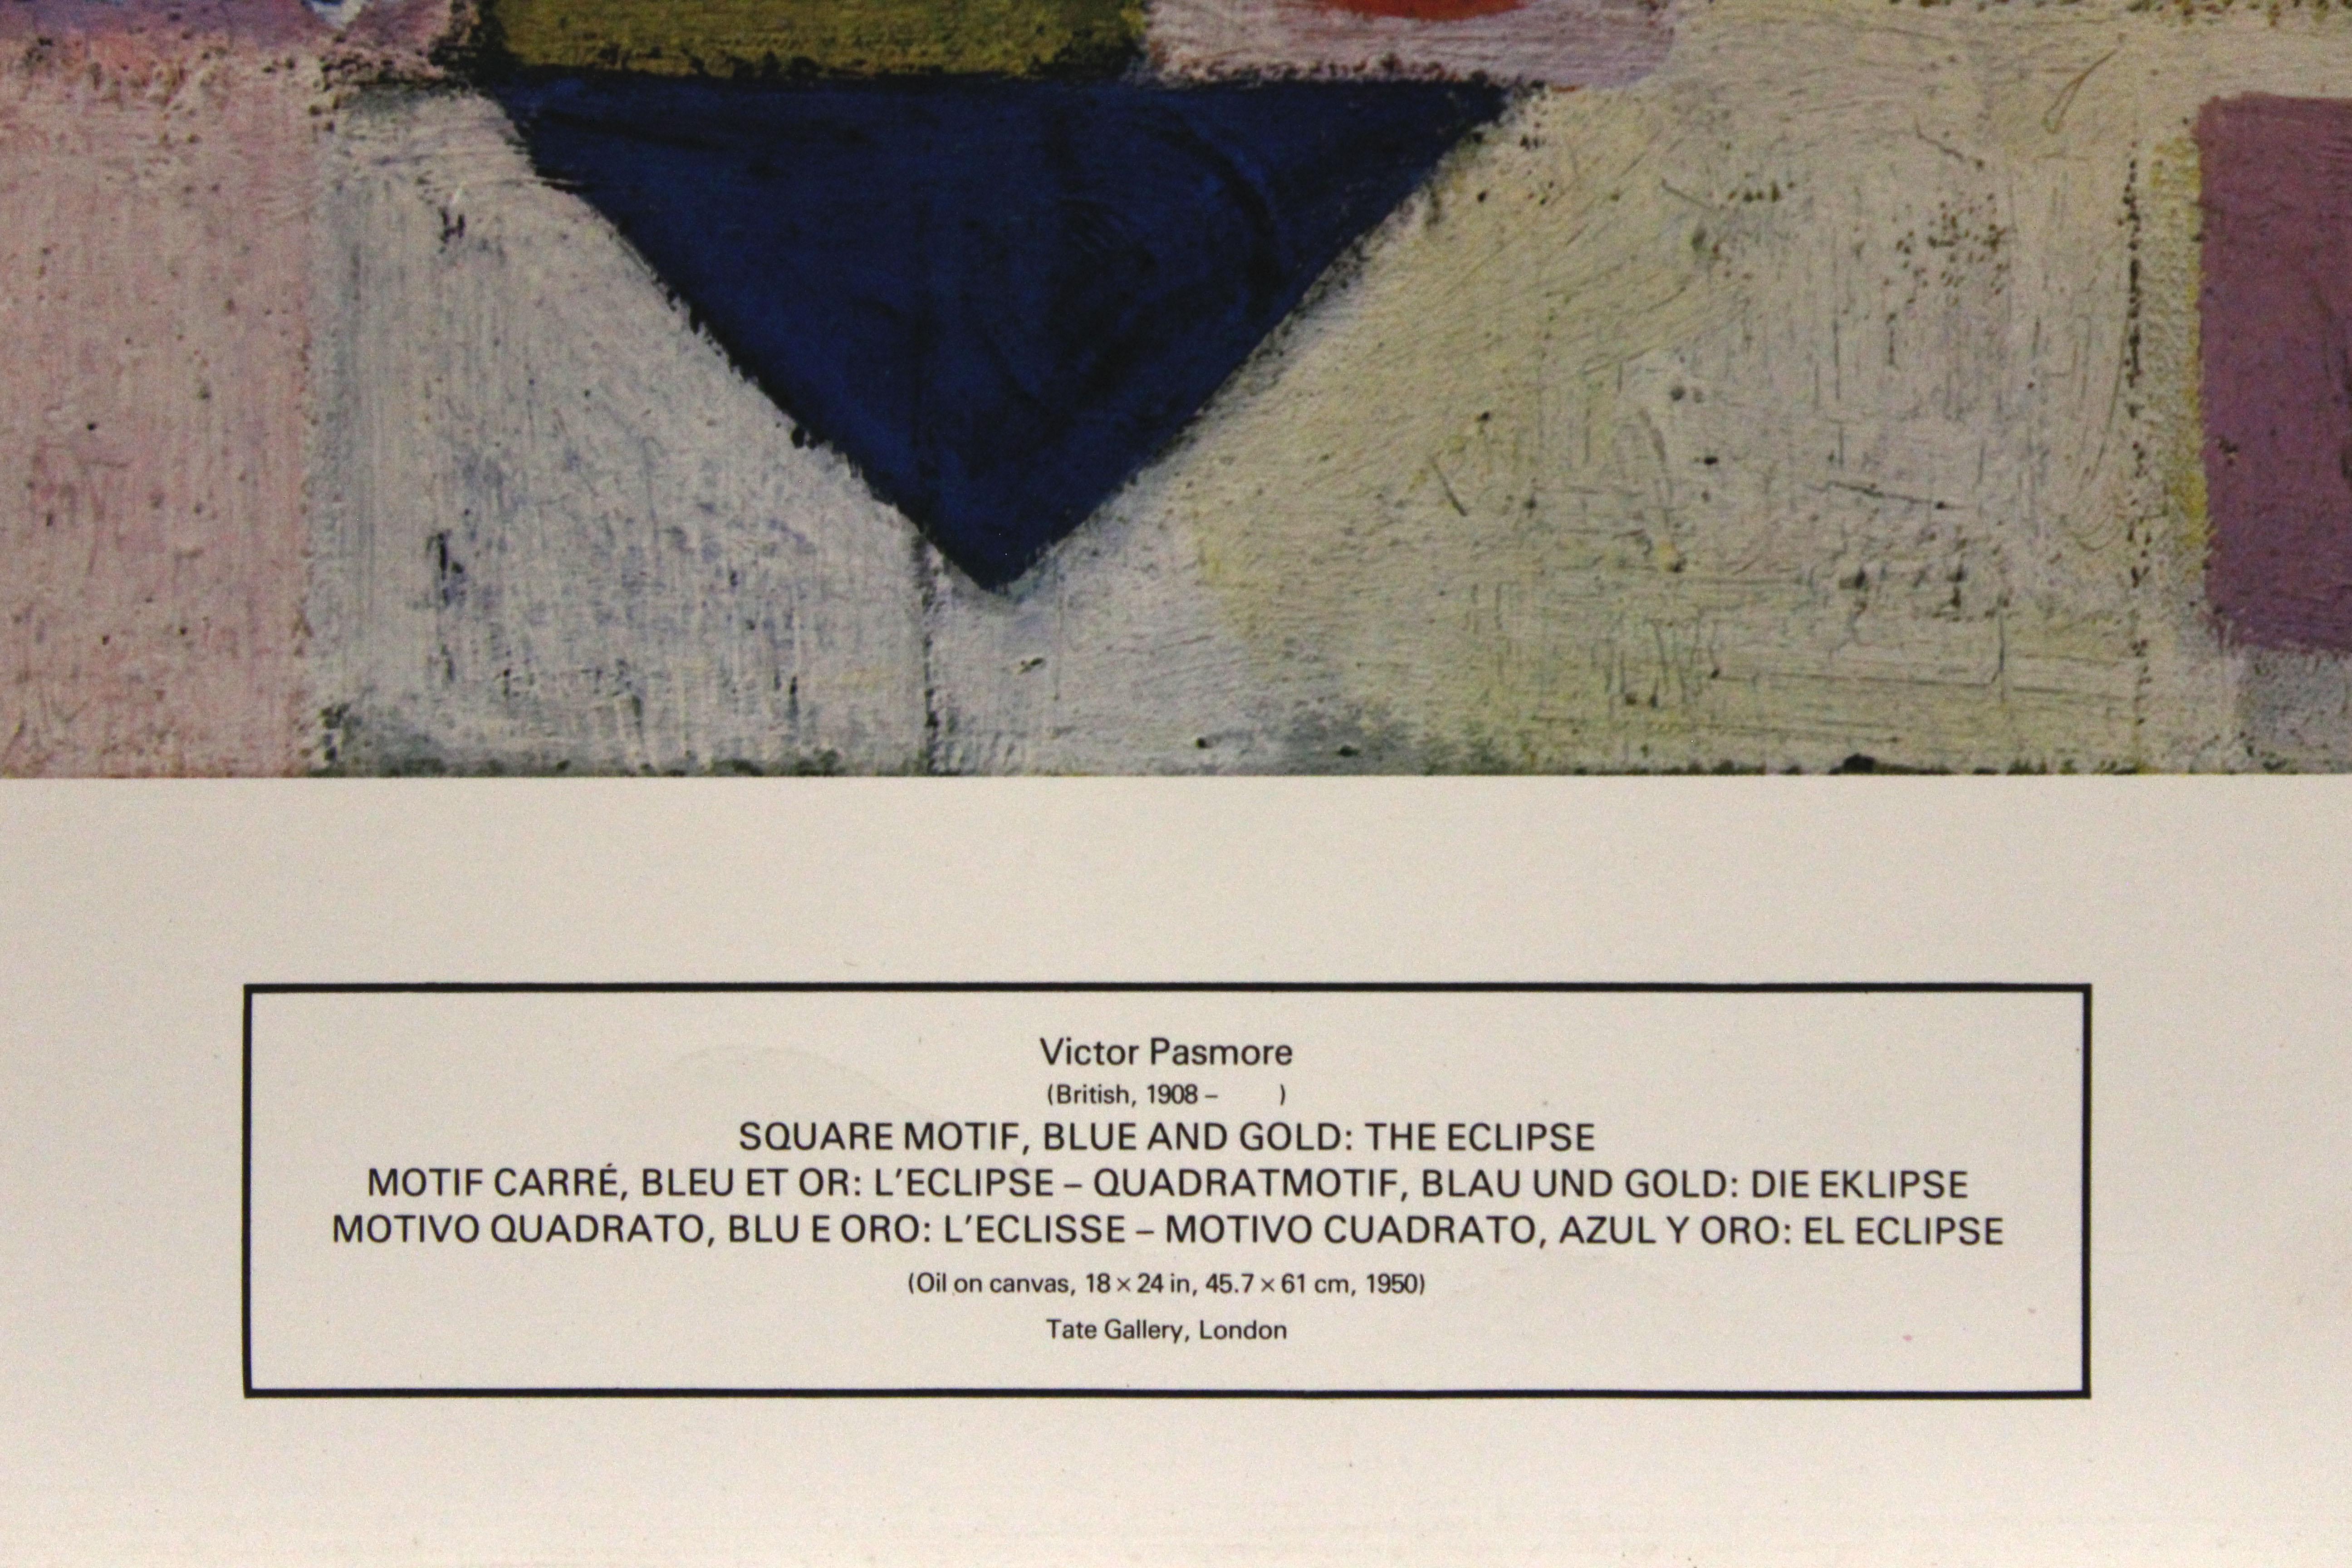 Square Motif, Blue and Gold: The Eclipse-Poster. New York Graphic Society. - Print by Victor Pasmore